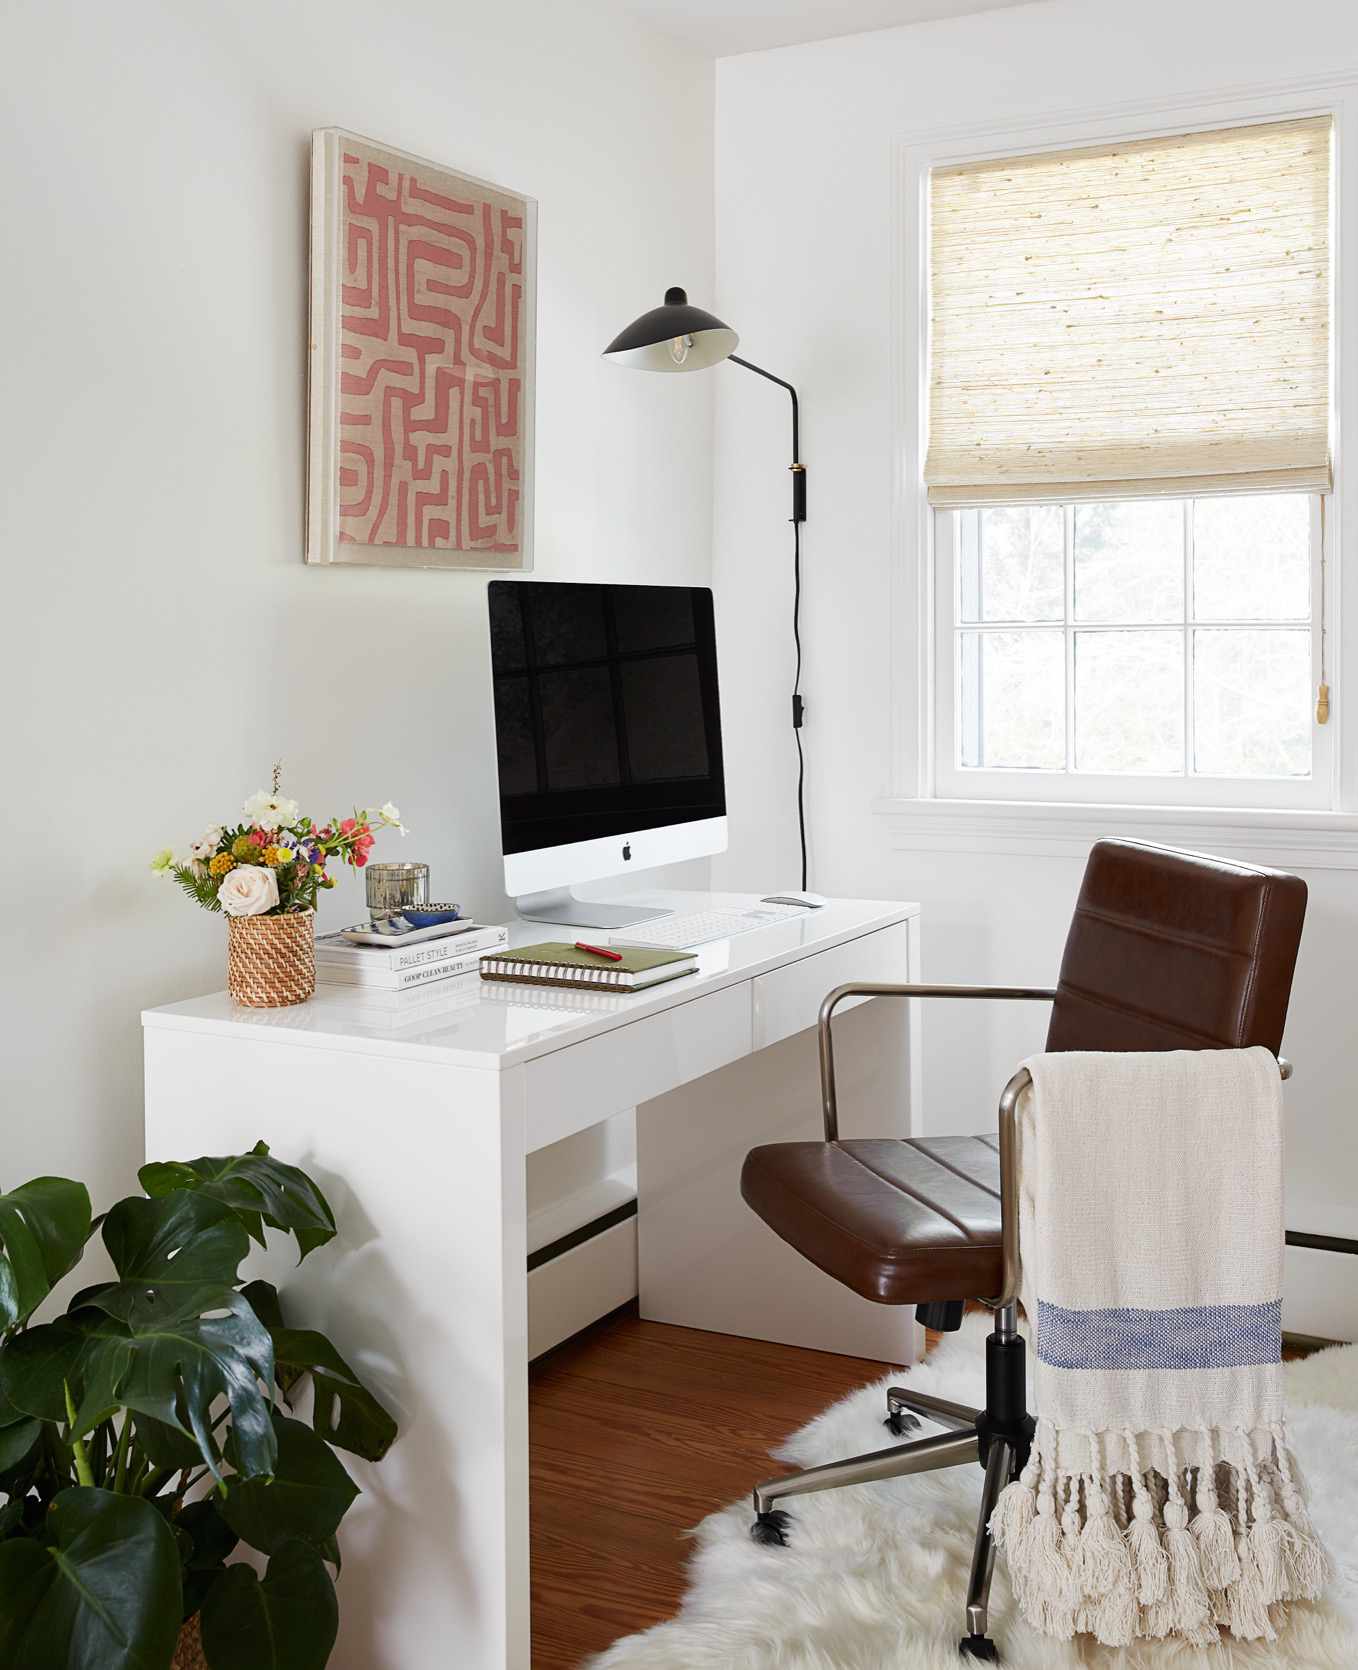 A white contemporary office desk hosts an apple computer below a framed peach colored artwork